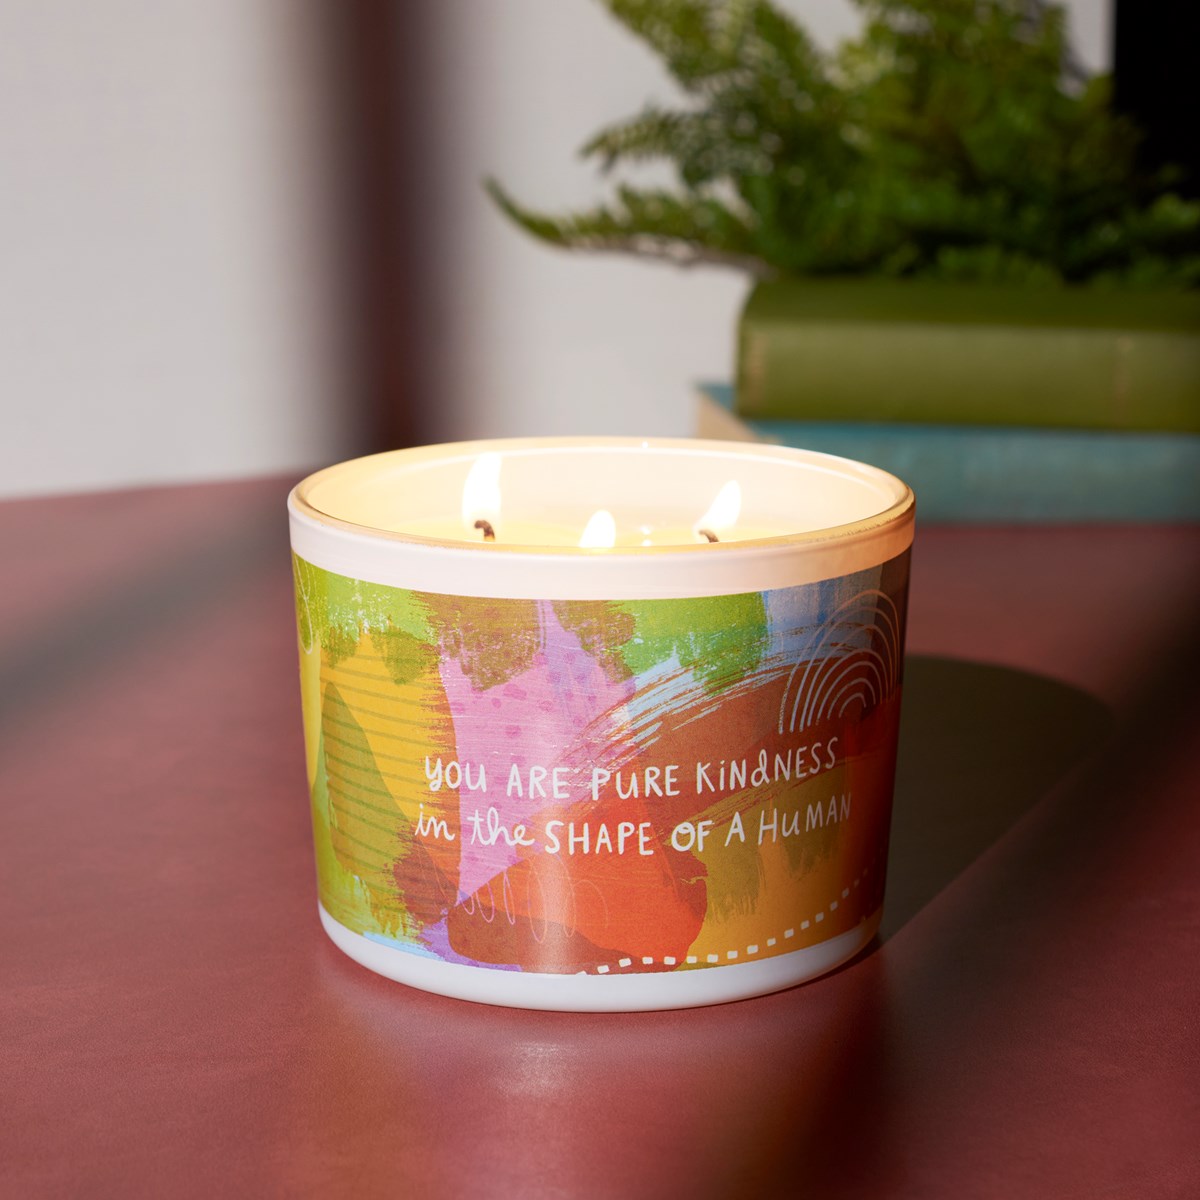 Pure Kindness Candle - Soy Wax, Glass, Cotton